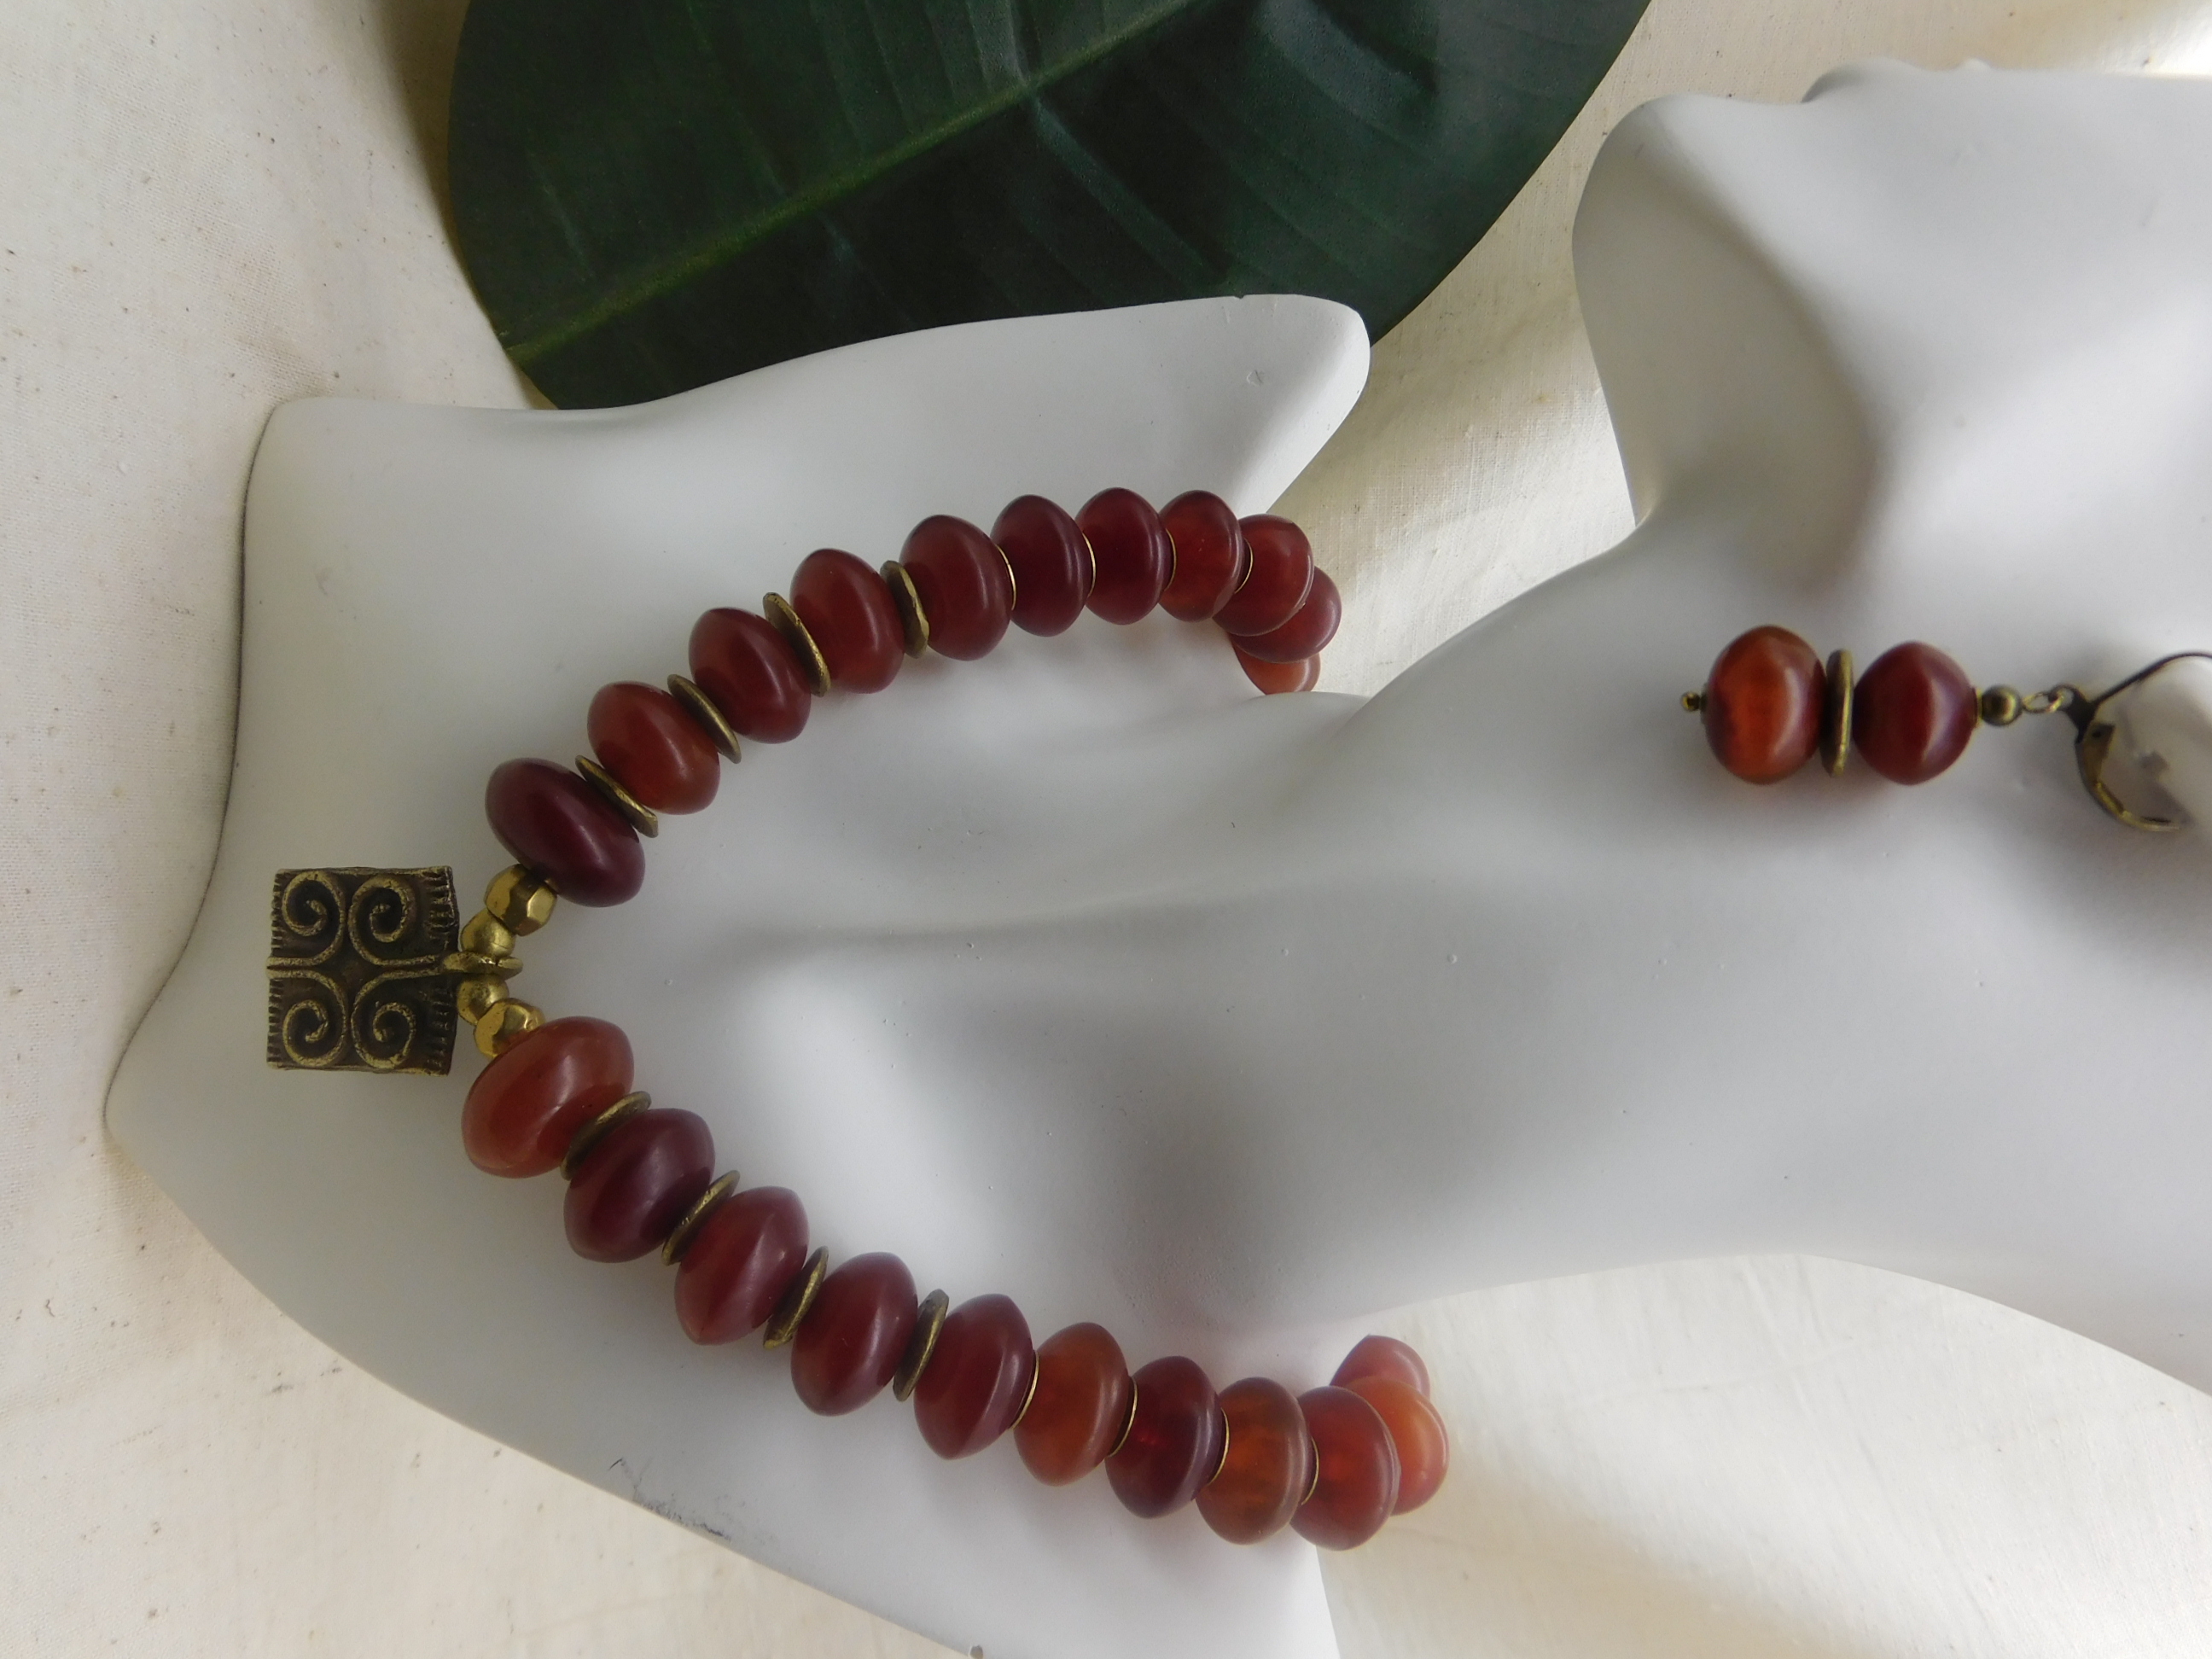 African inspired necklace with resin amber beads and a handmade brass pendant with a Sankofa symbol